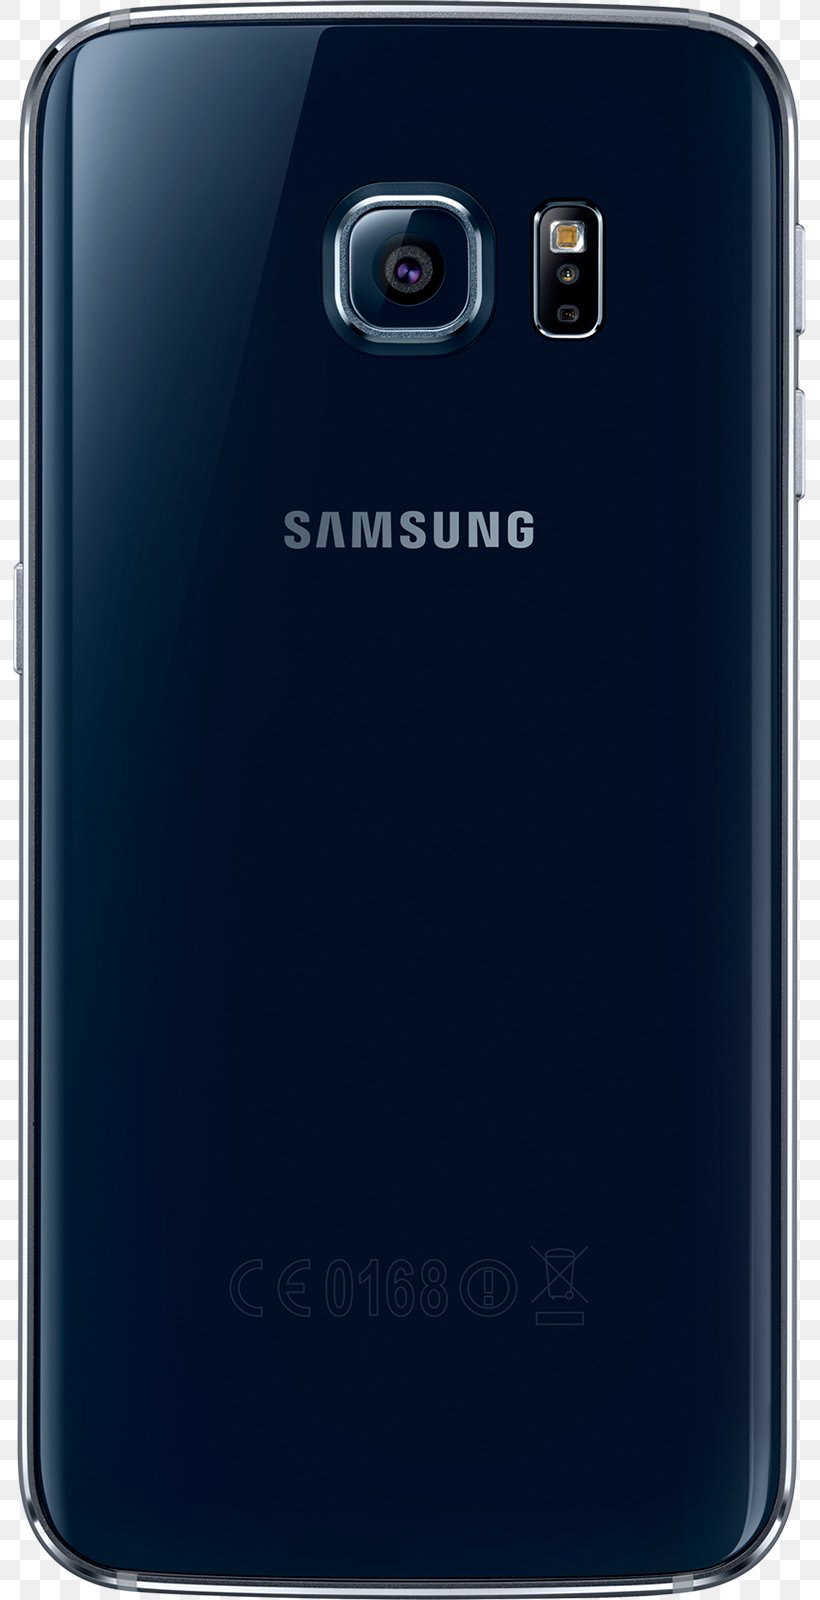 Samsung Galaxy S7 Android Telephone Smartphone, PNG, 793x1600px, Samsung Galaxy S7, Android, Cellular Network, Communication Device, Electric Blue Download Free